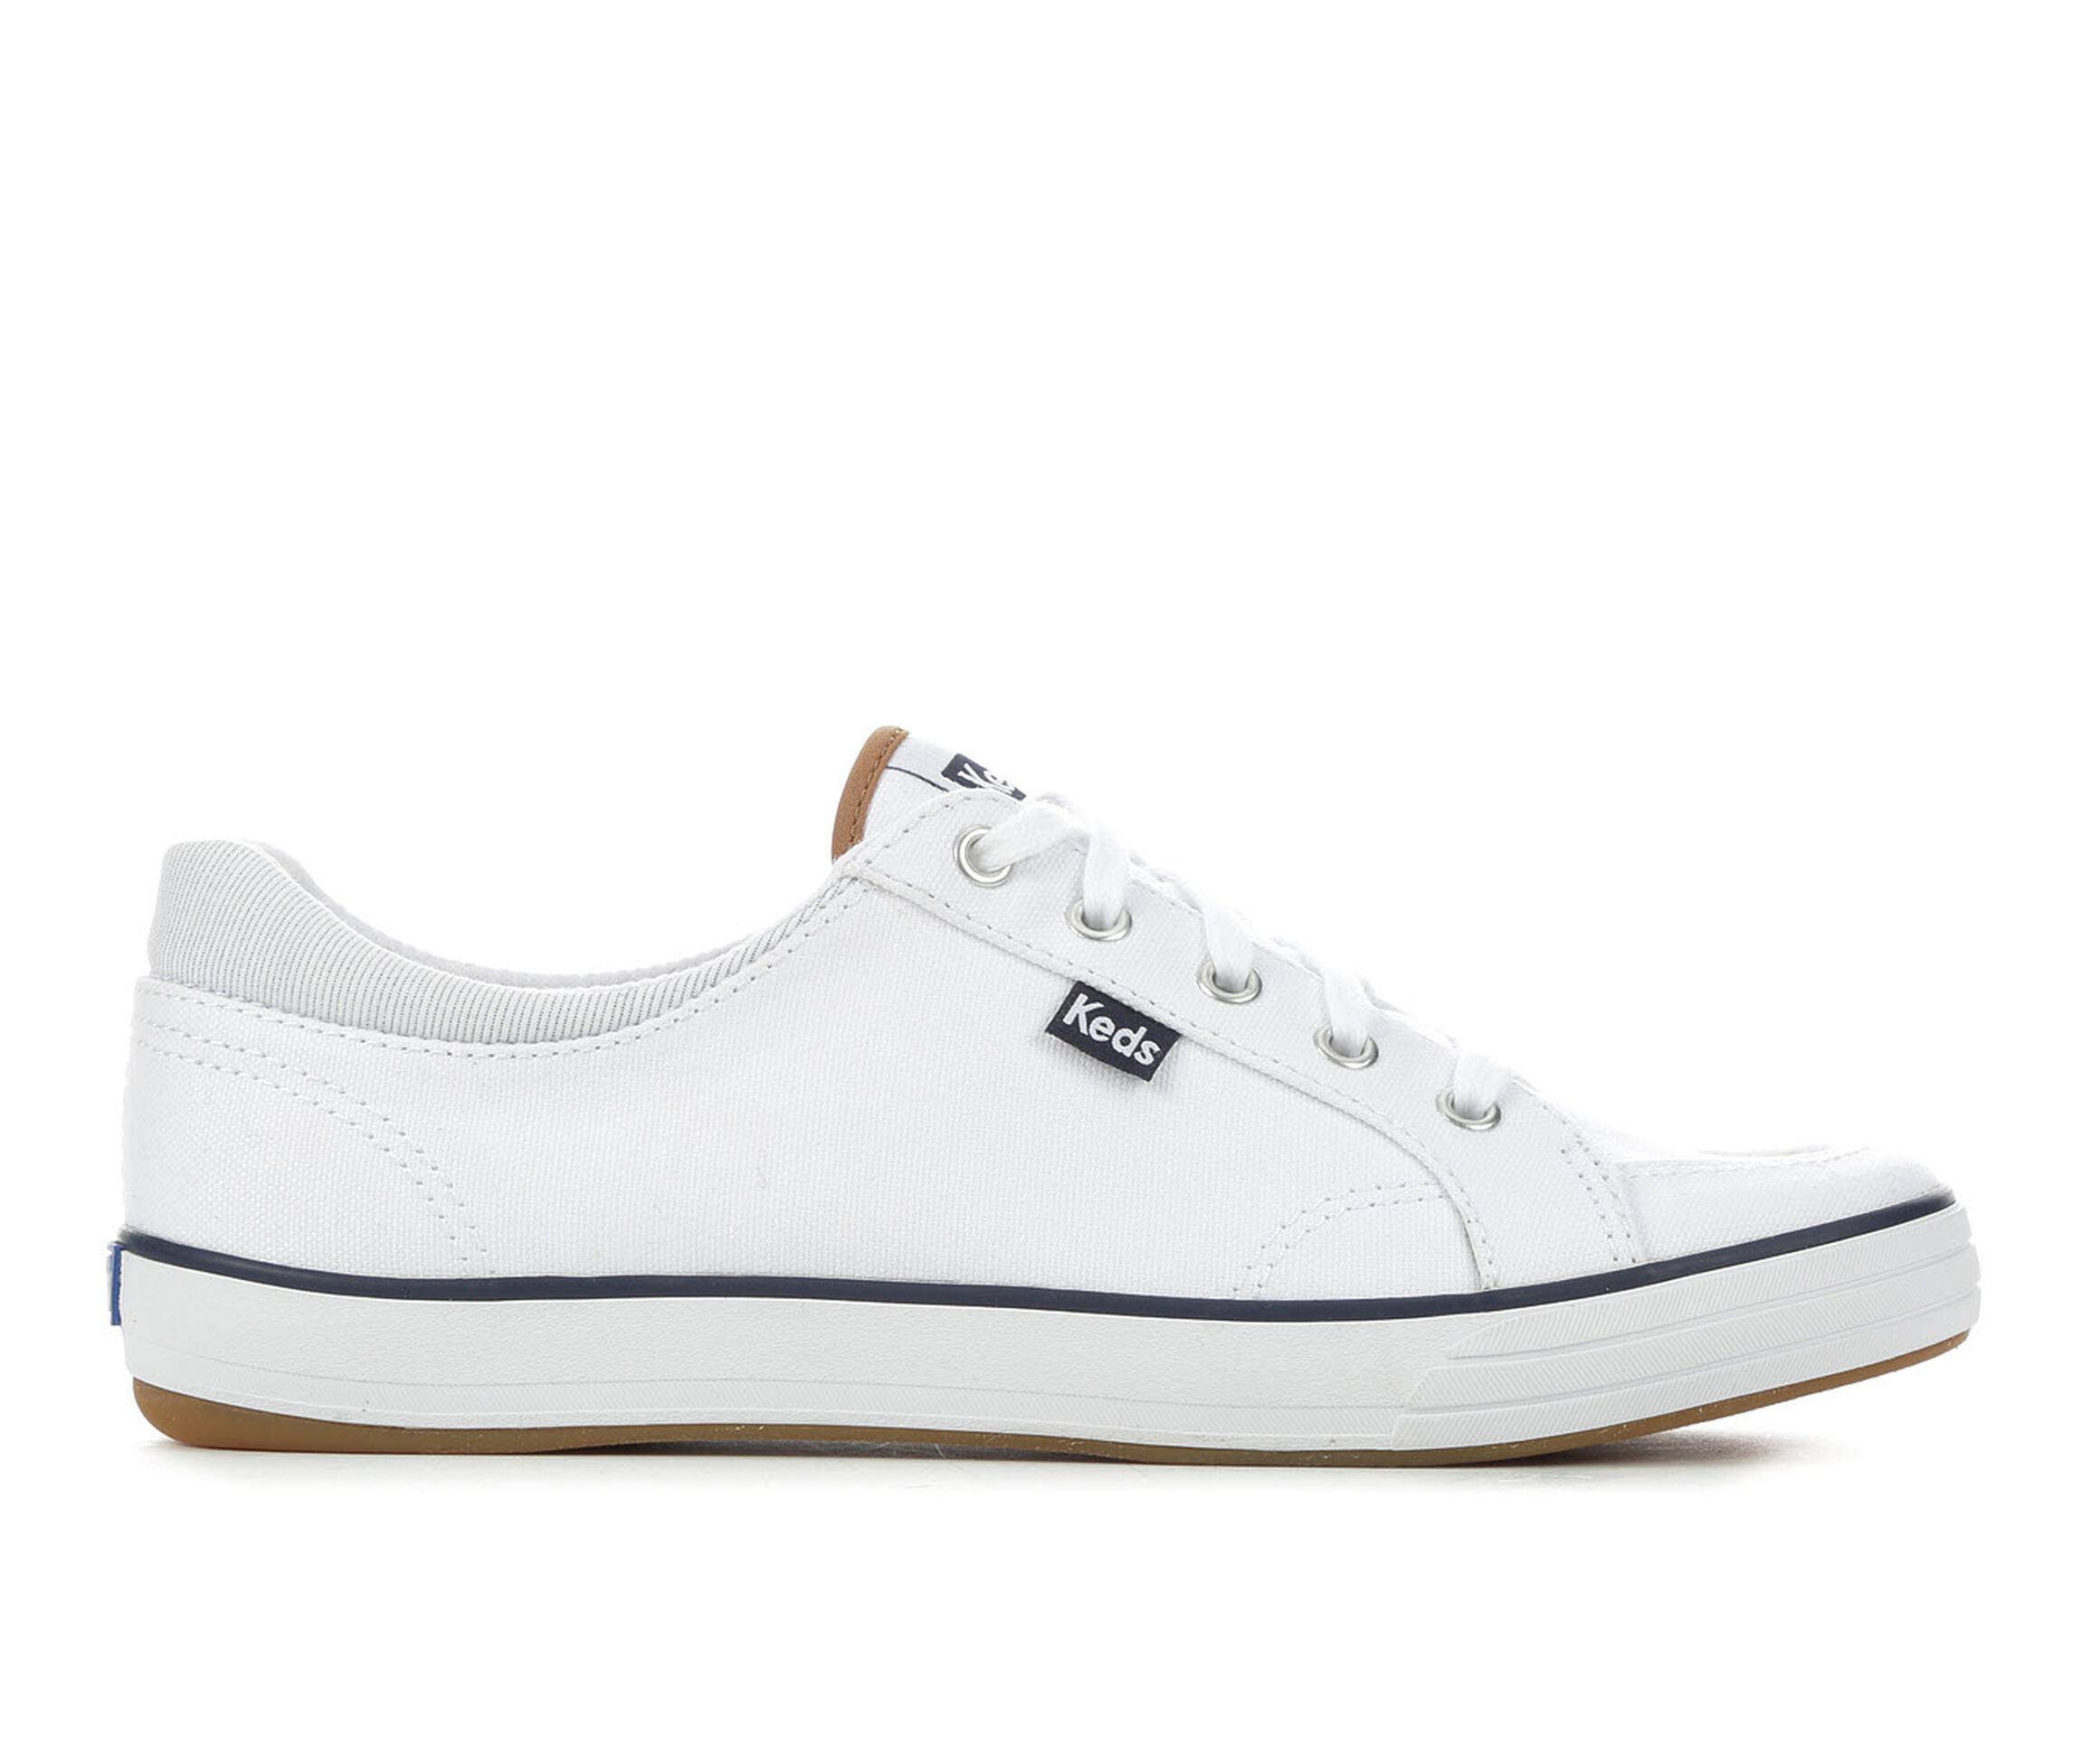 Keds Shoes & Slip-On Sneakers | Shoe Carnival